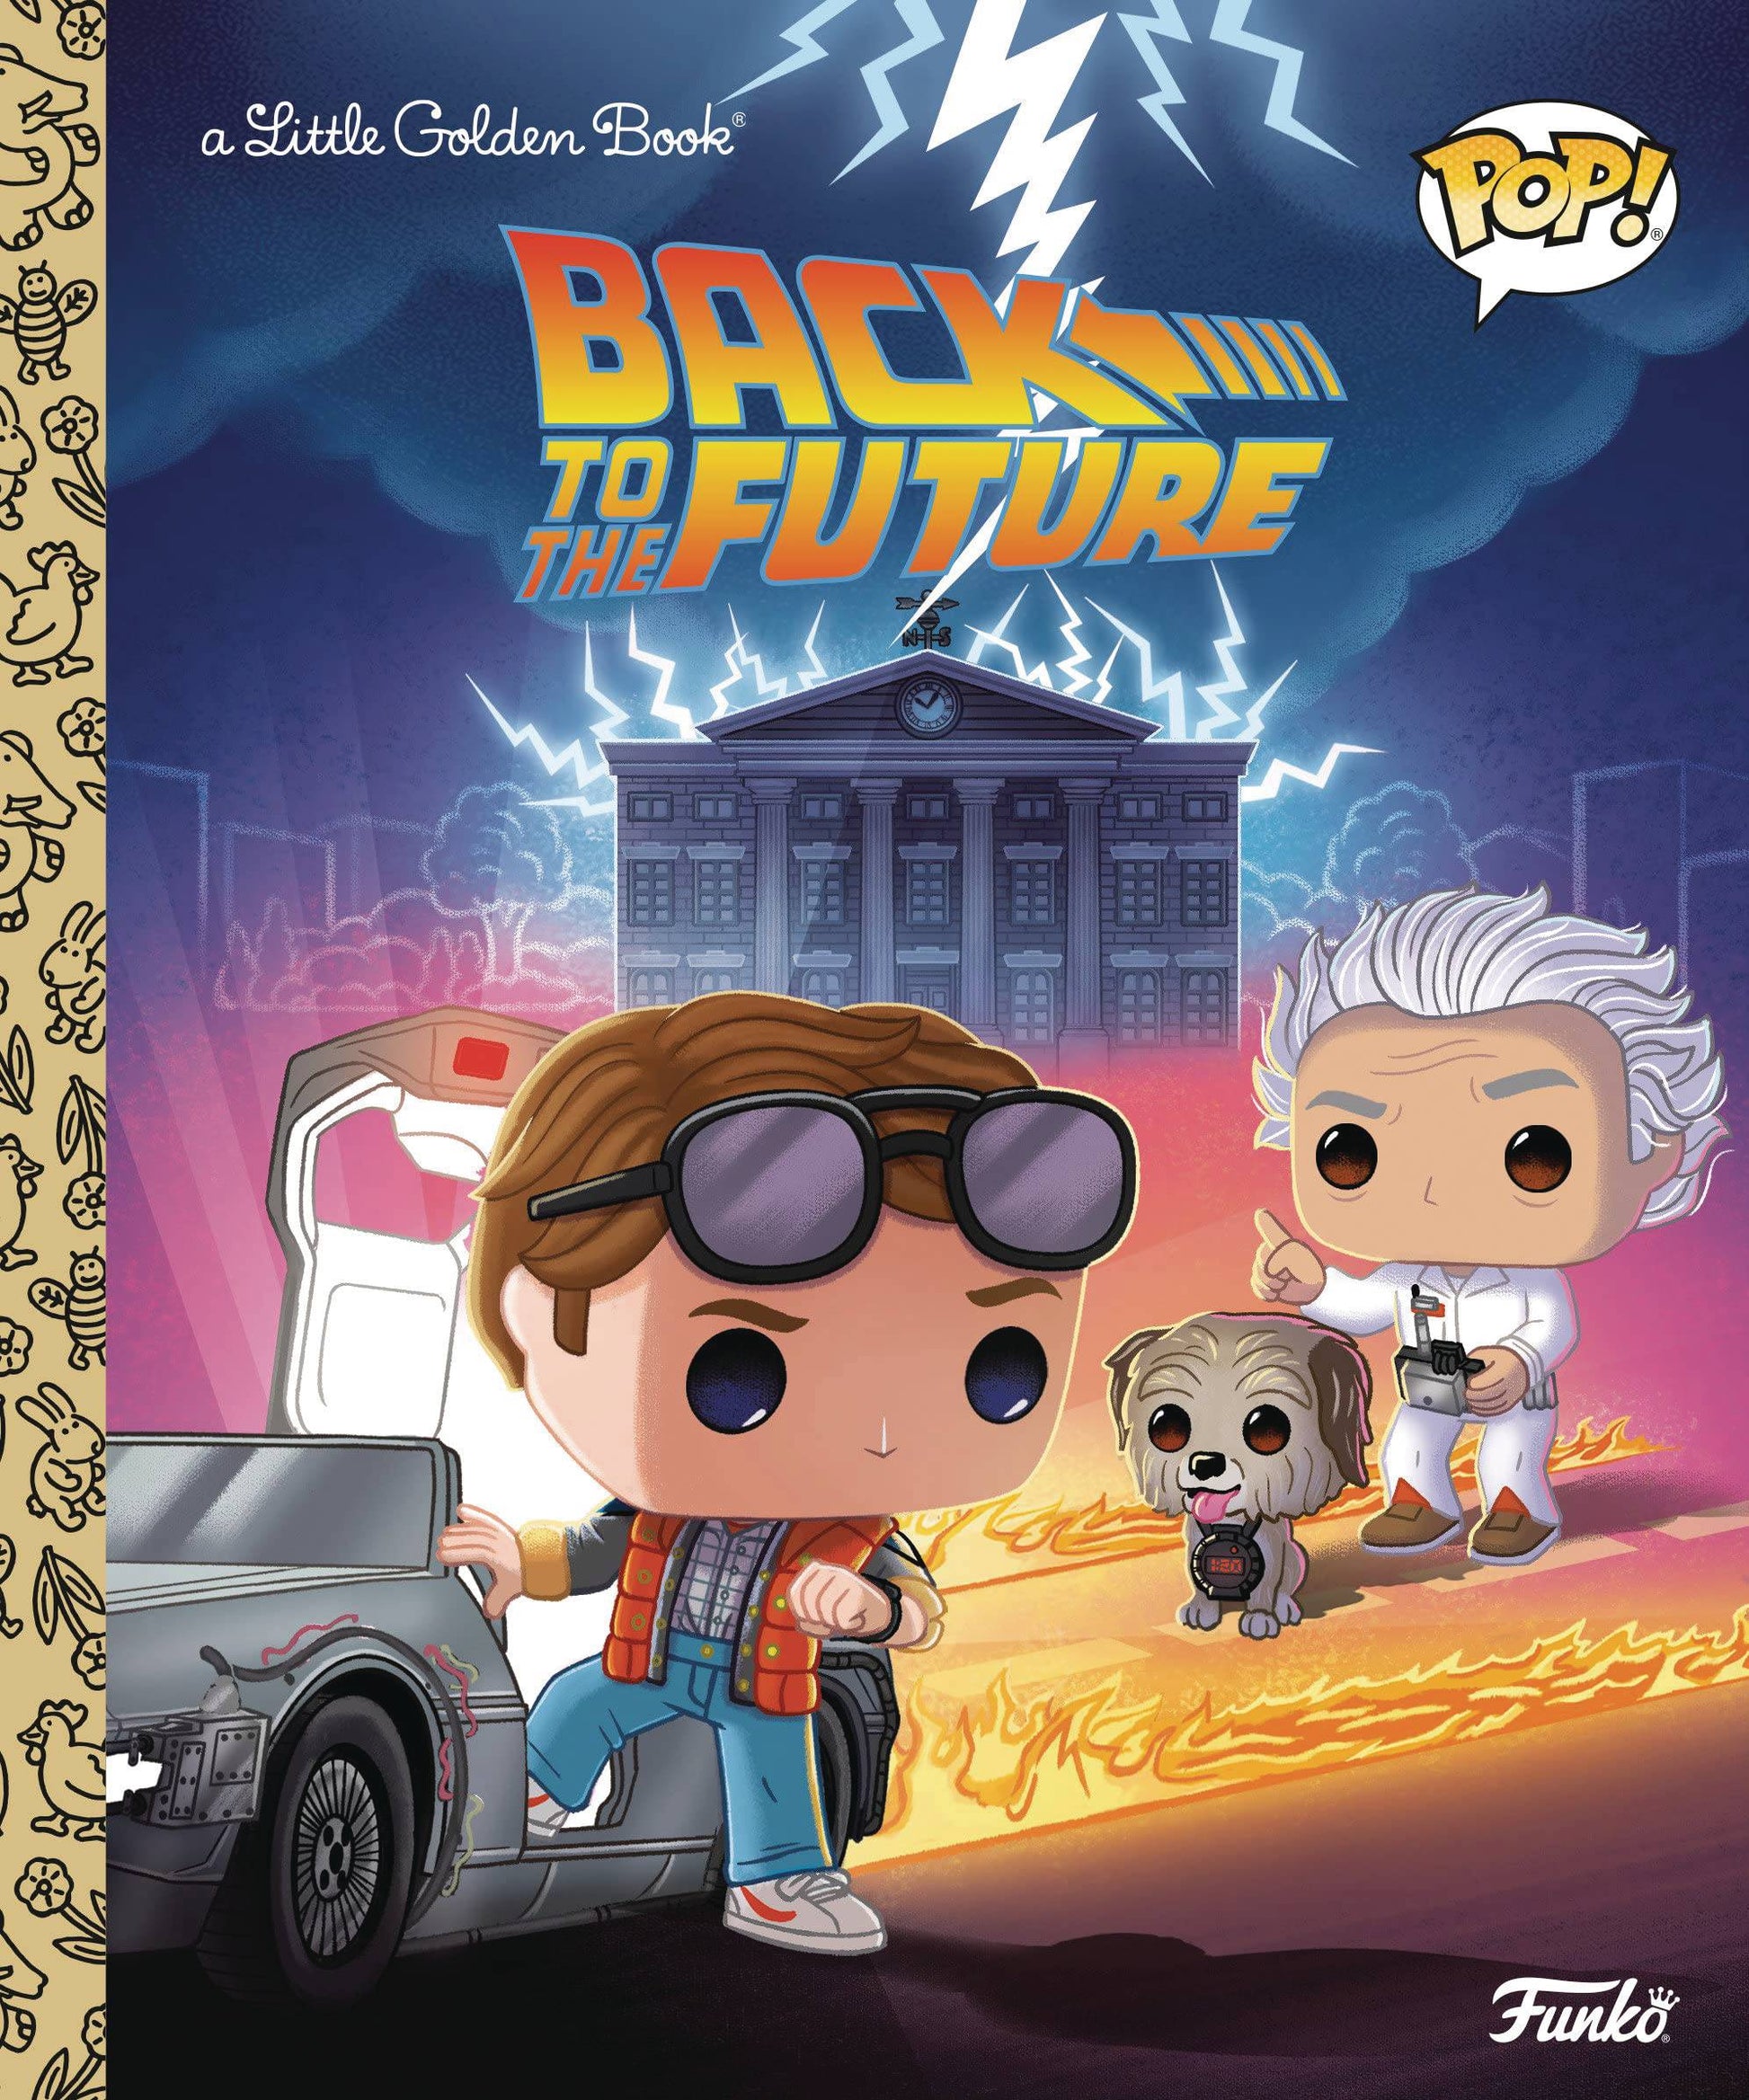 The One Stop Shop Comics & Games Funko Back To Future Little Golden Book (C: 1-1-0) (01/04/2023) GOLDEN BOOKS